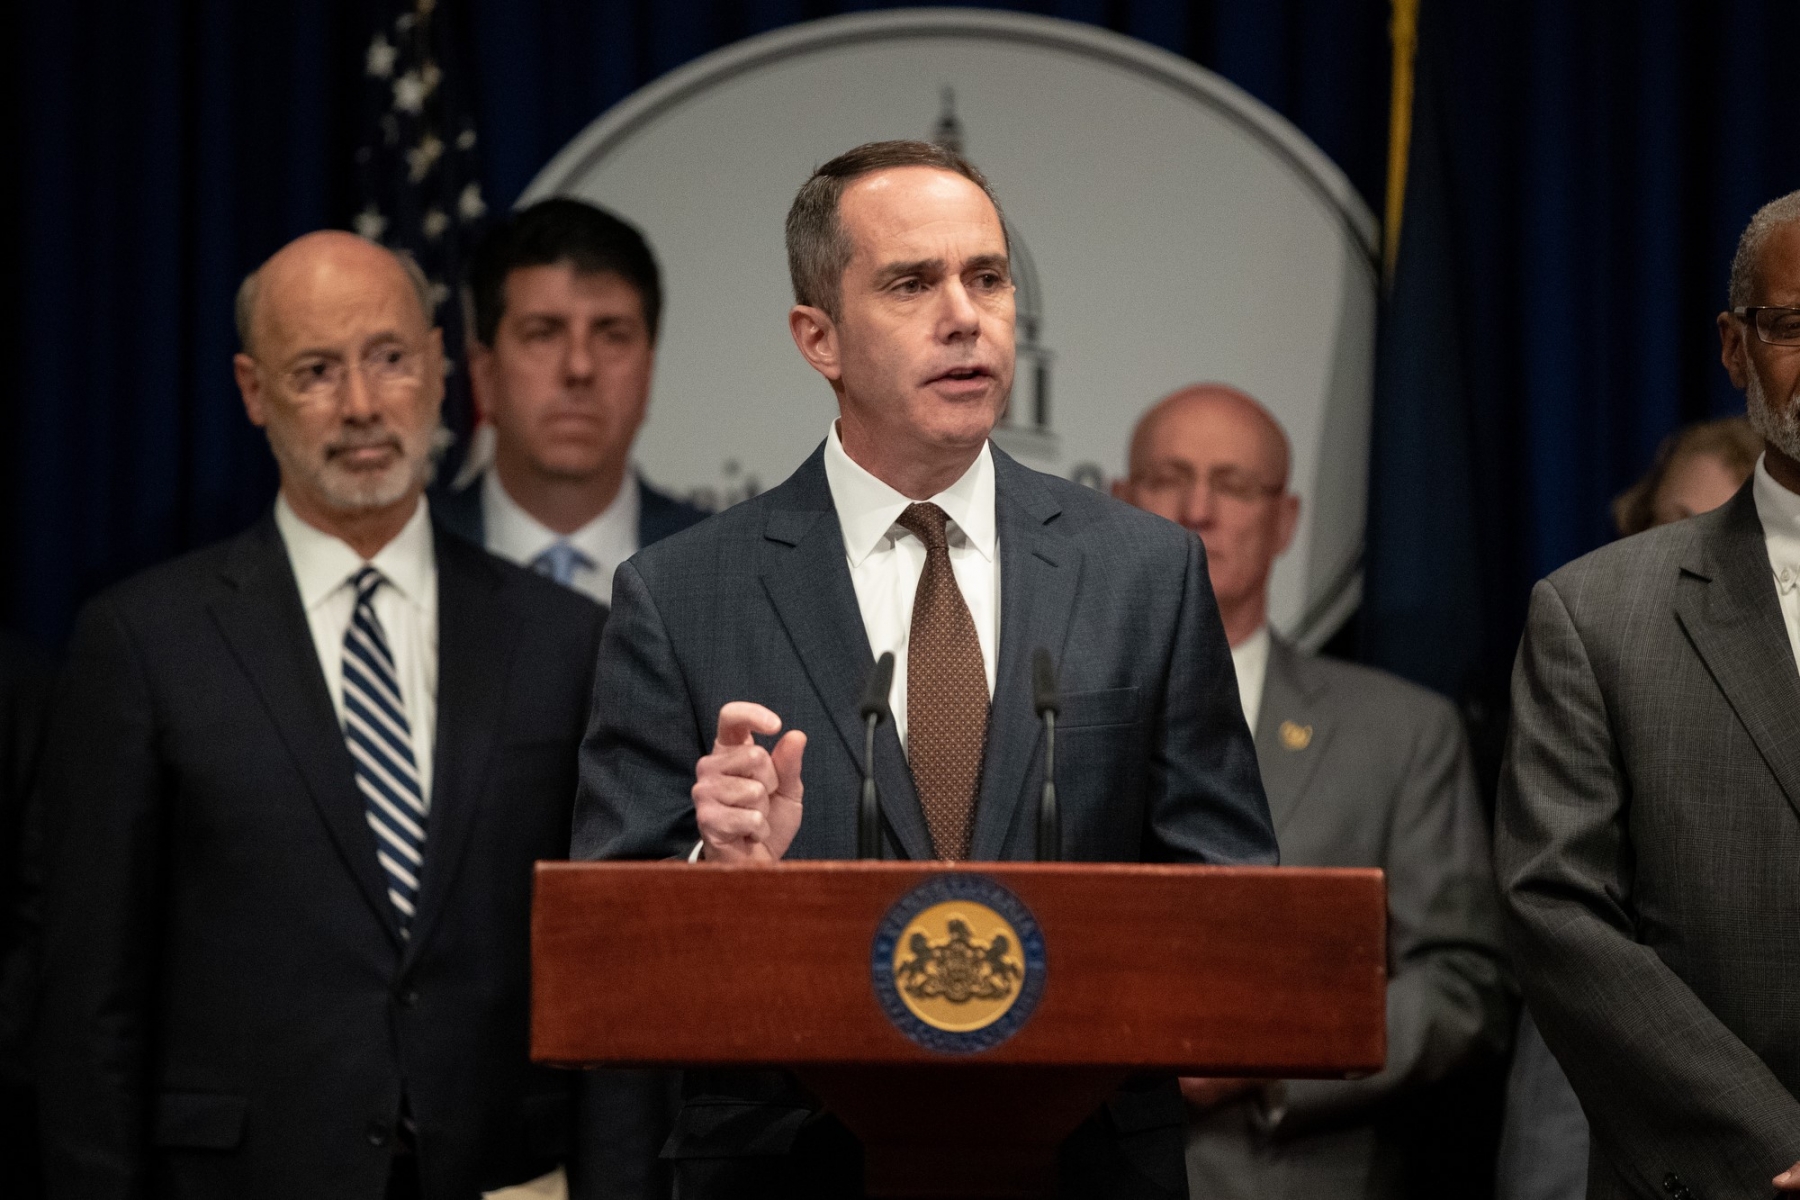 April 29, 2019: Senator Steve Santarsiero joins Governor Tom Wolf  to announce Pennsylvania’s membership in the U.S. Climate Alliance and release the state’s new climate action plan.